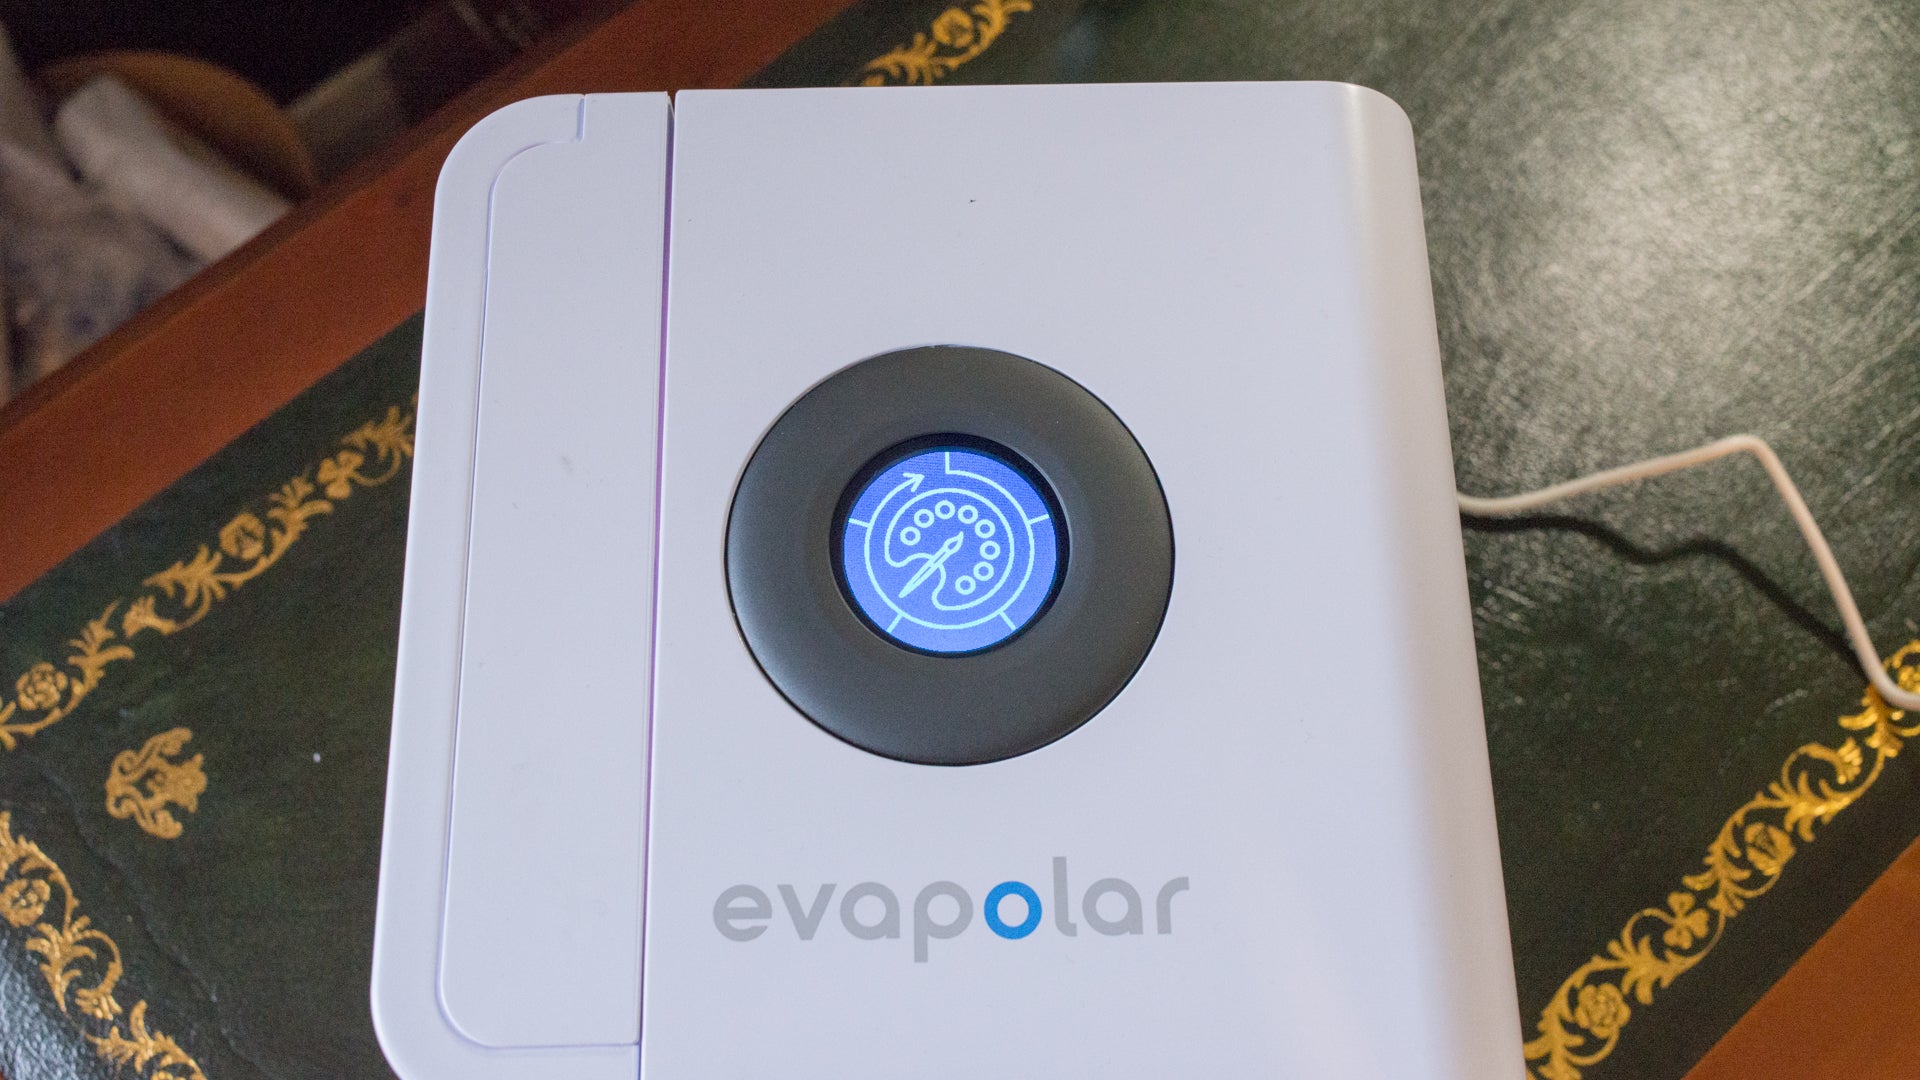 Evapolar Personal Air Cooler on a table with illuminated control.